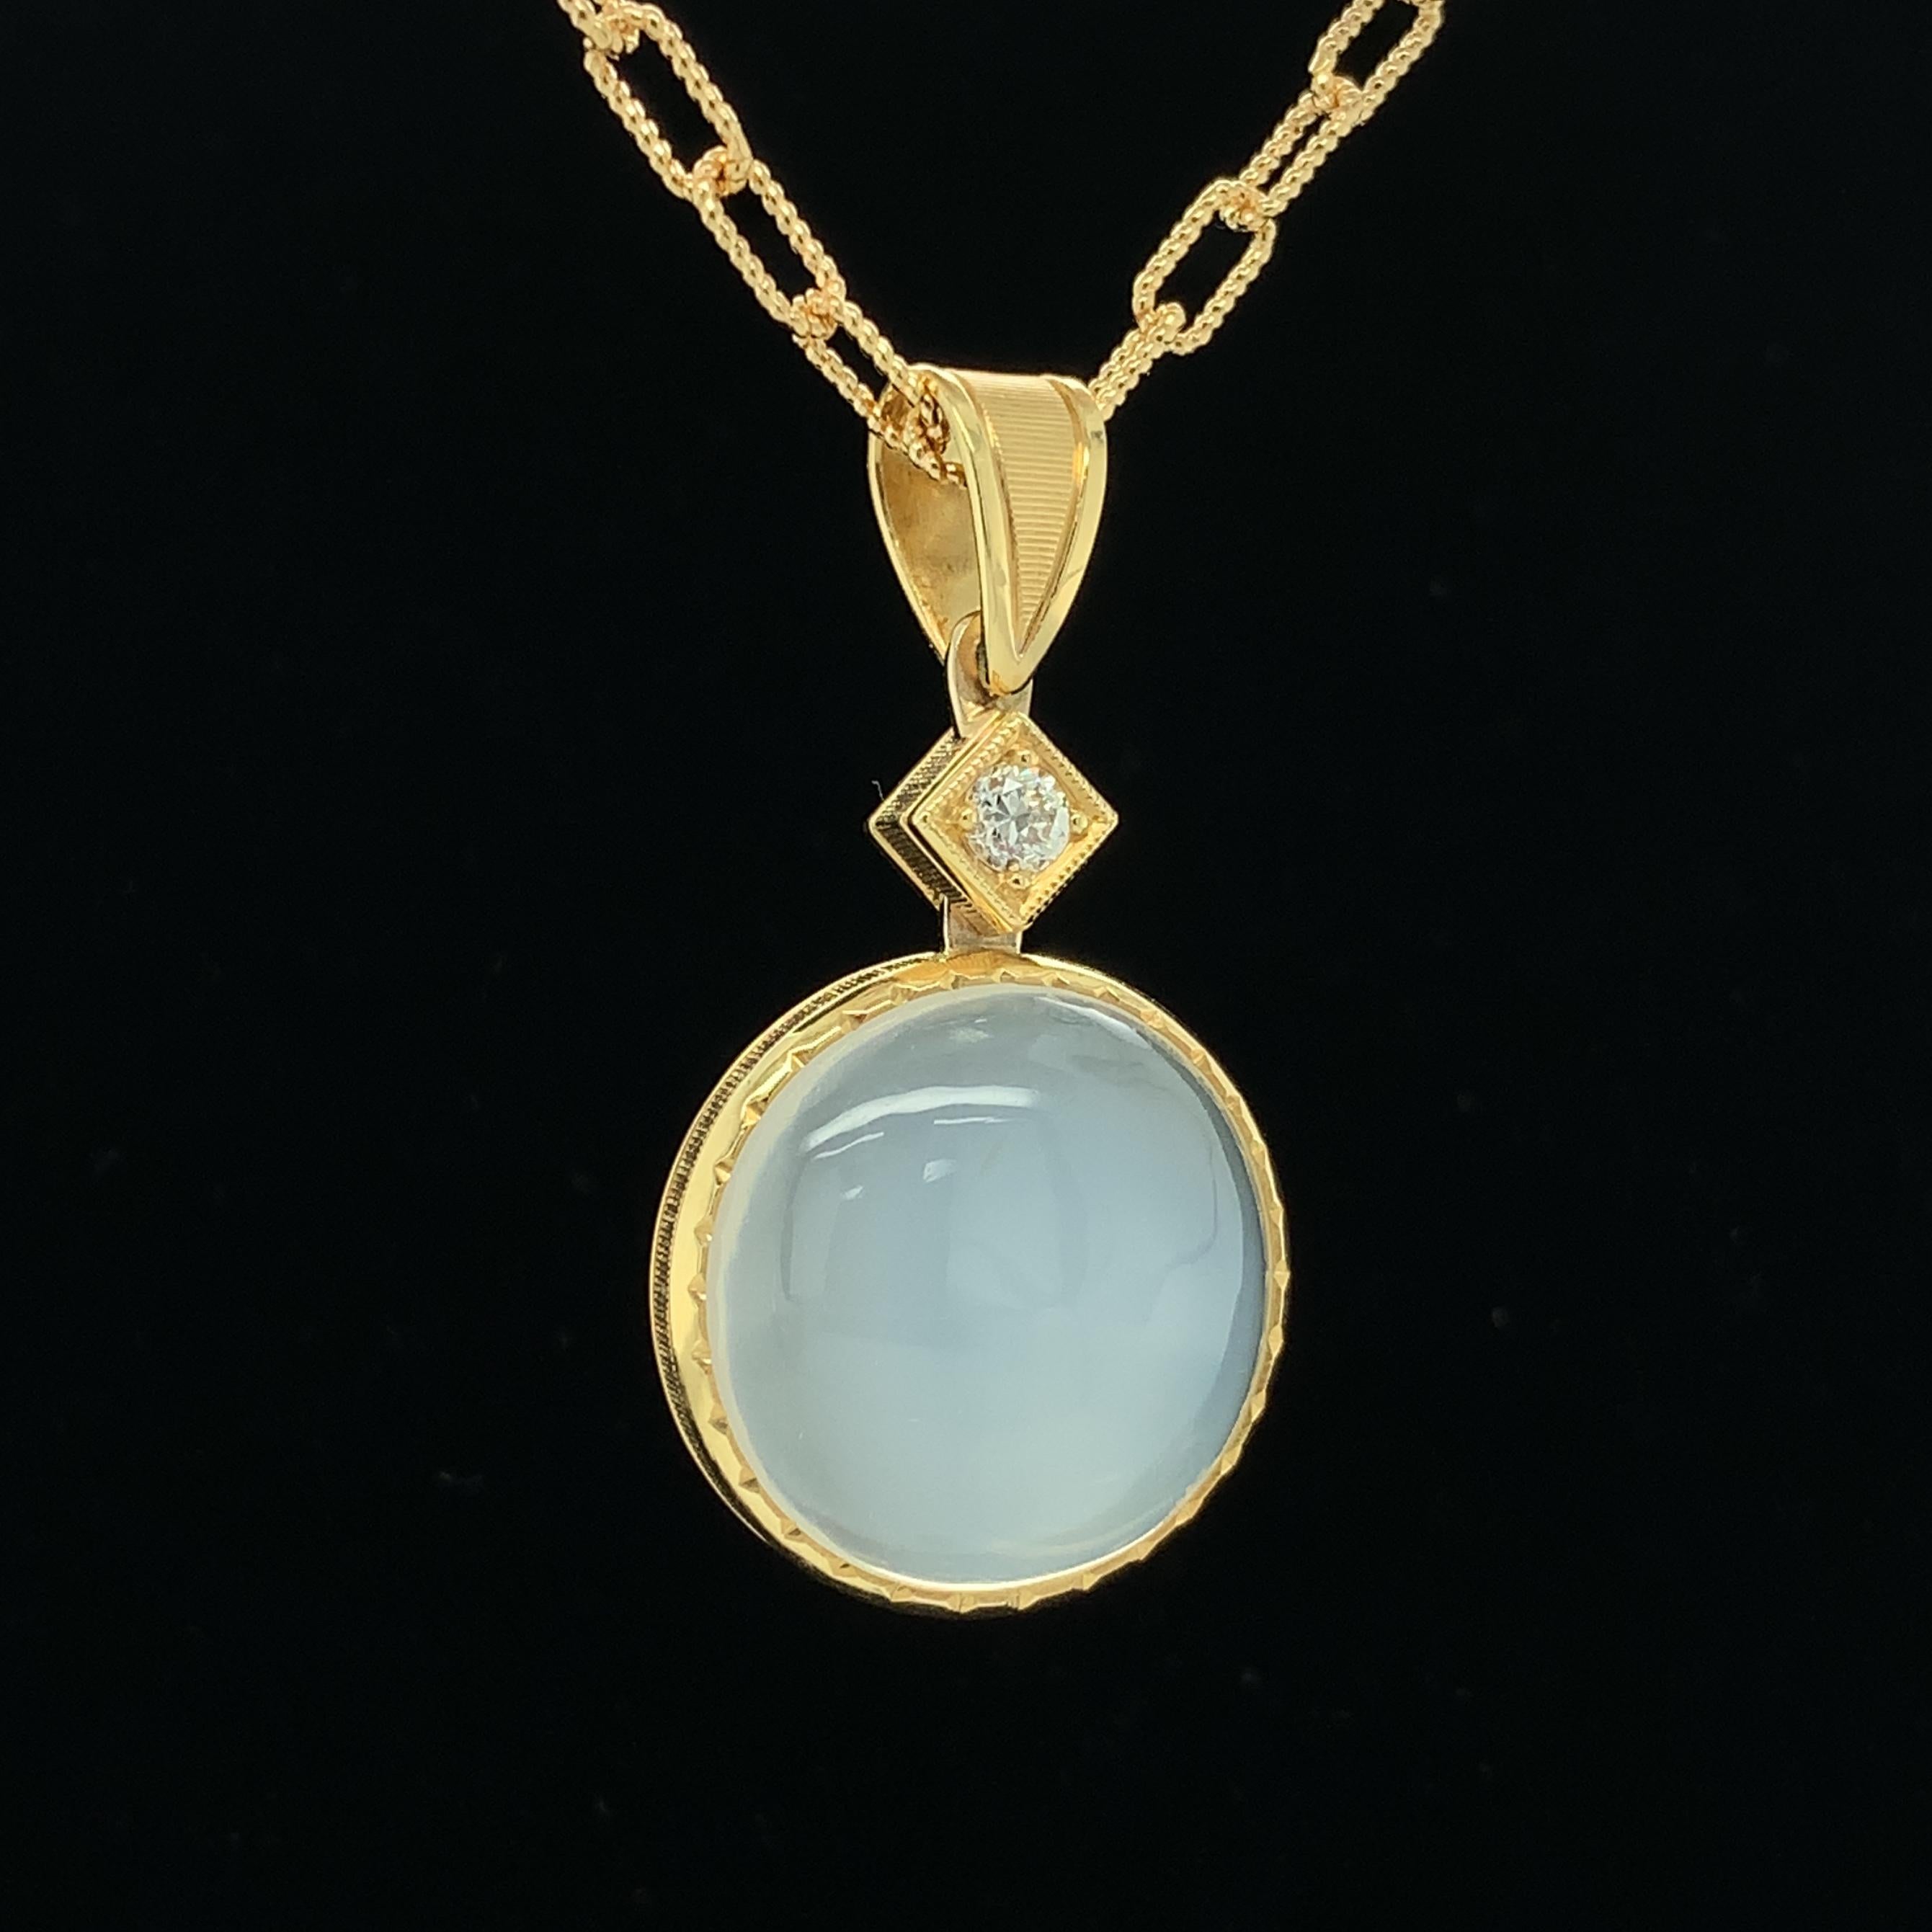 16.95 ct. Round Moonstone, Diamond, Yellow Gold Pendant Necklace with Chain 2